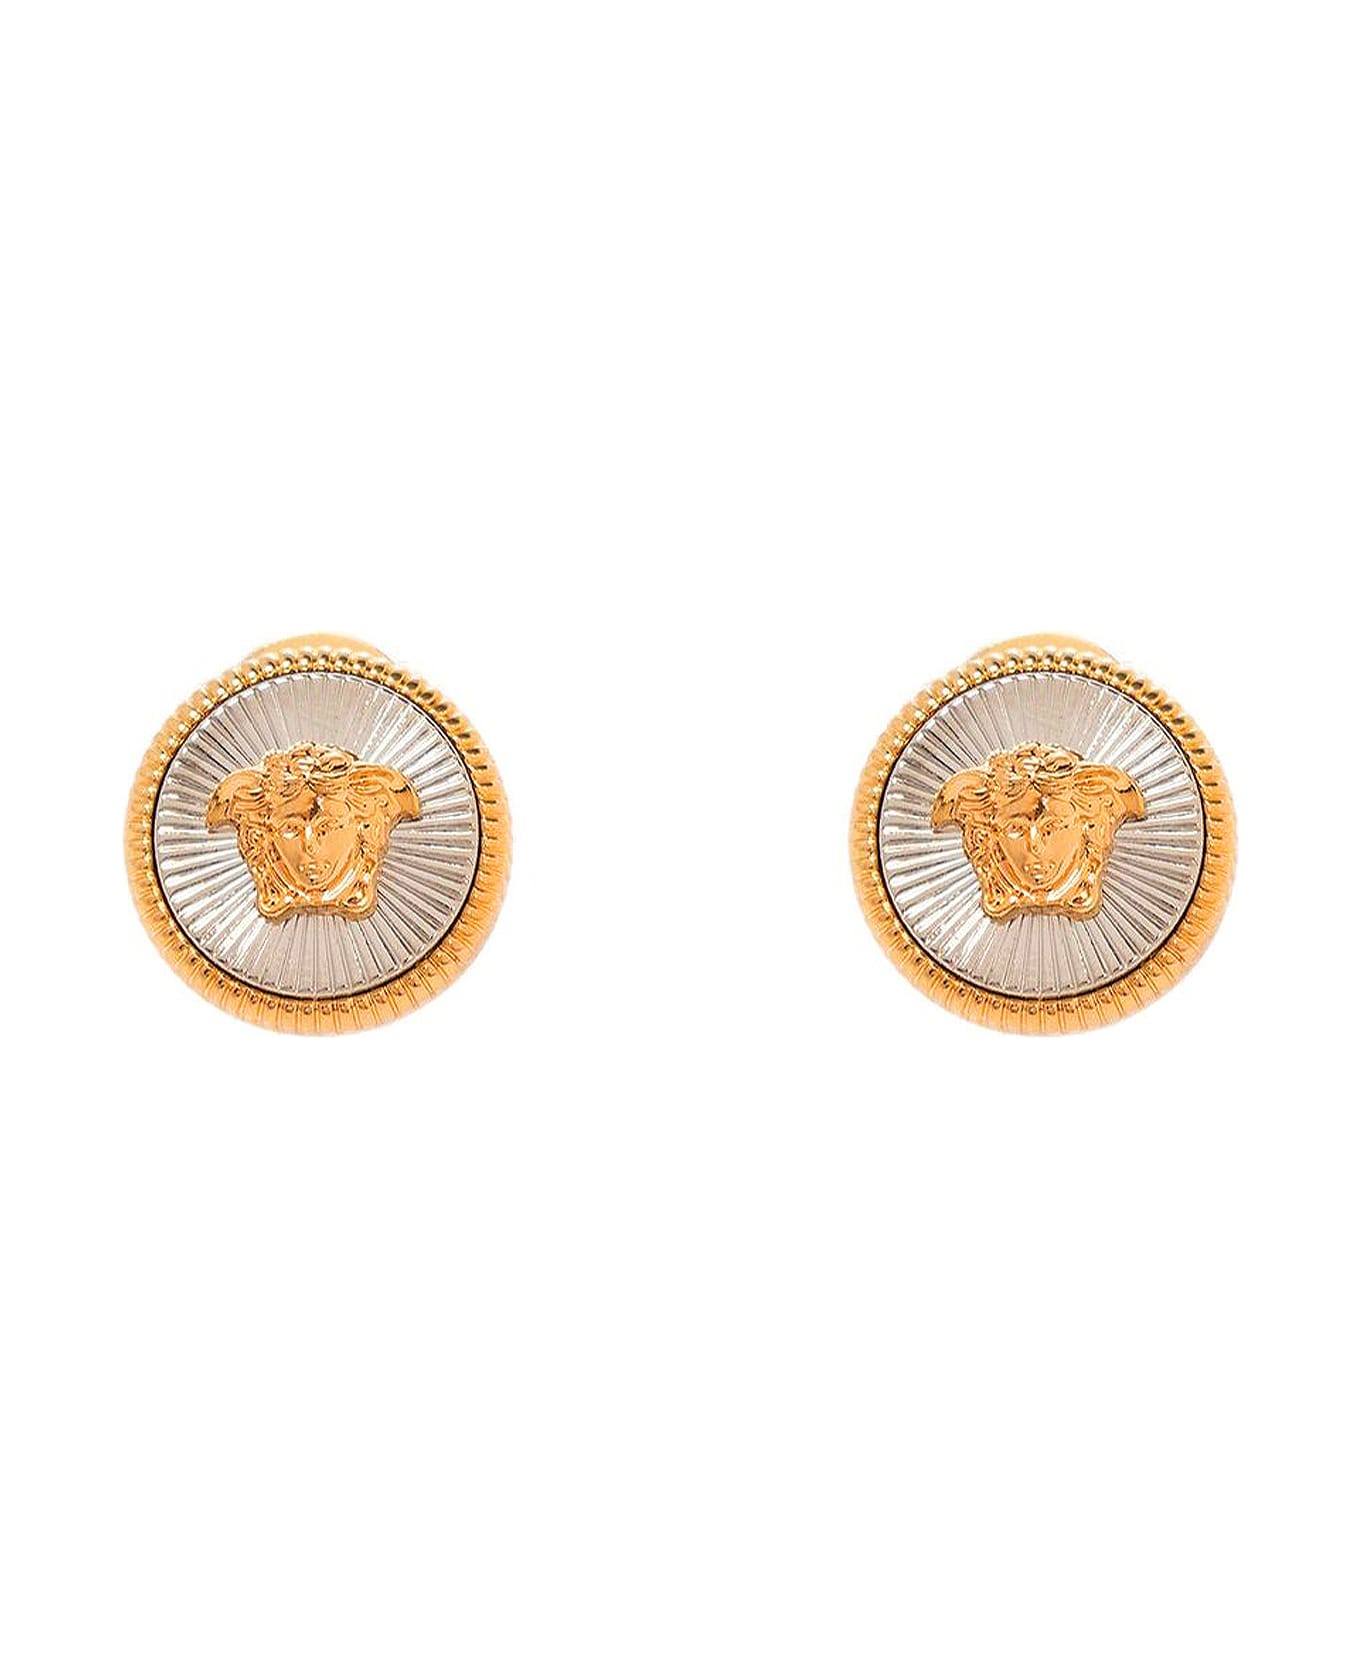 Versace Silver And Gold Earrings With Medusa Detail In Metal Woman - Gold